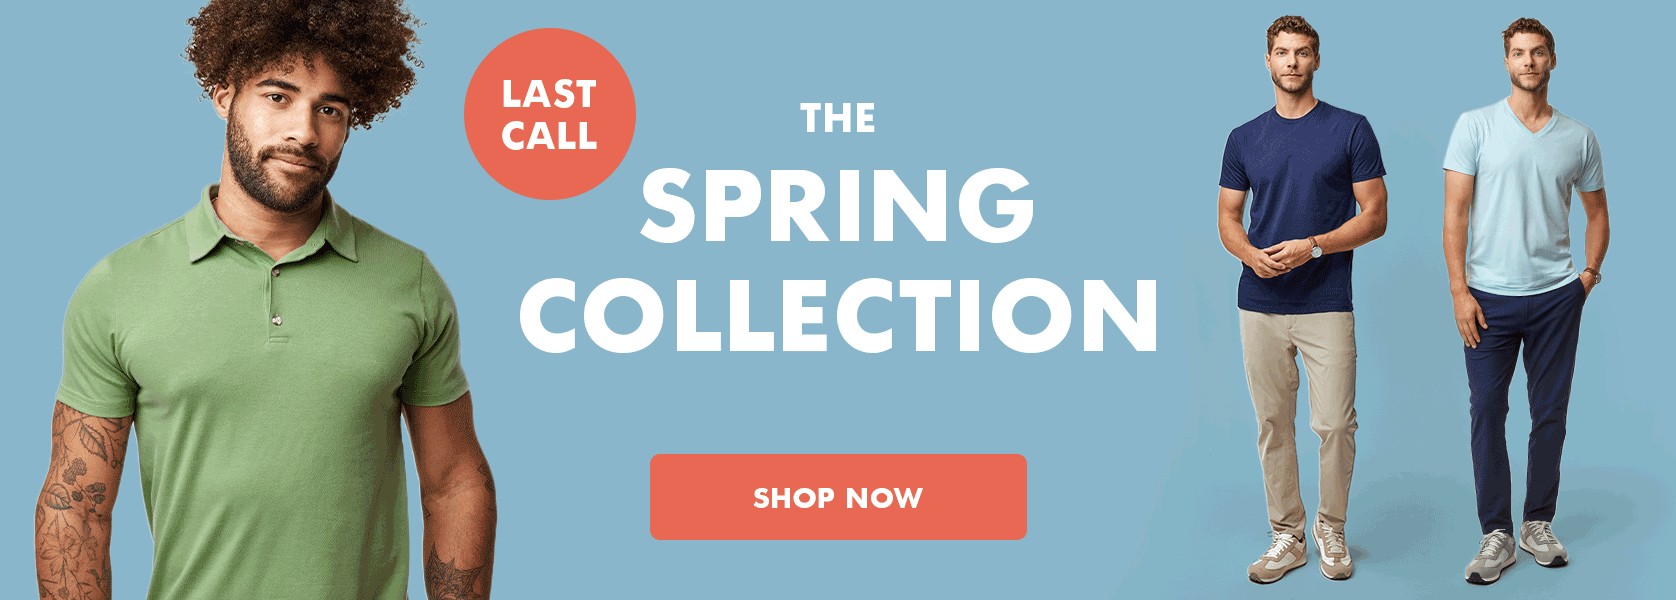 Last Call for Spring Colors | Fresh Clean Threads